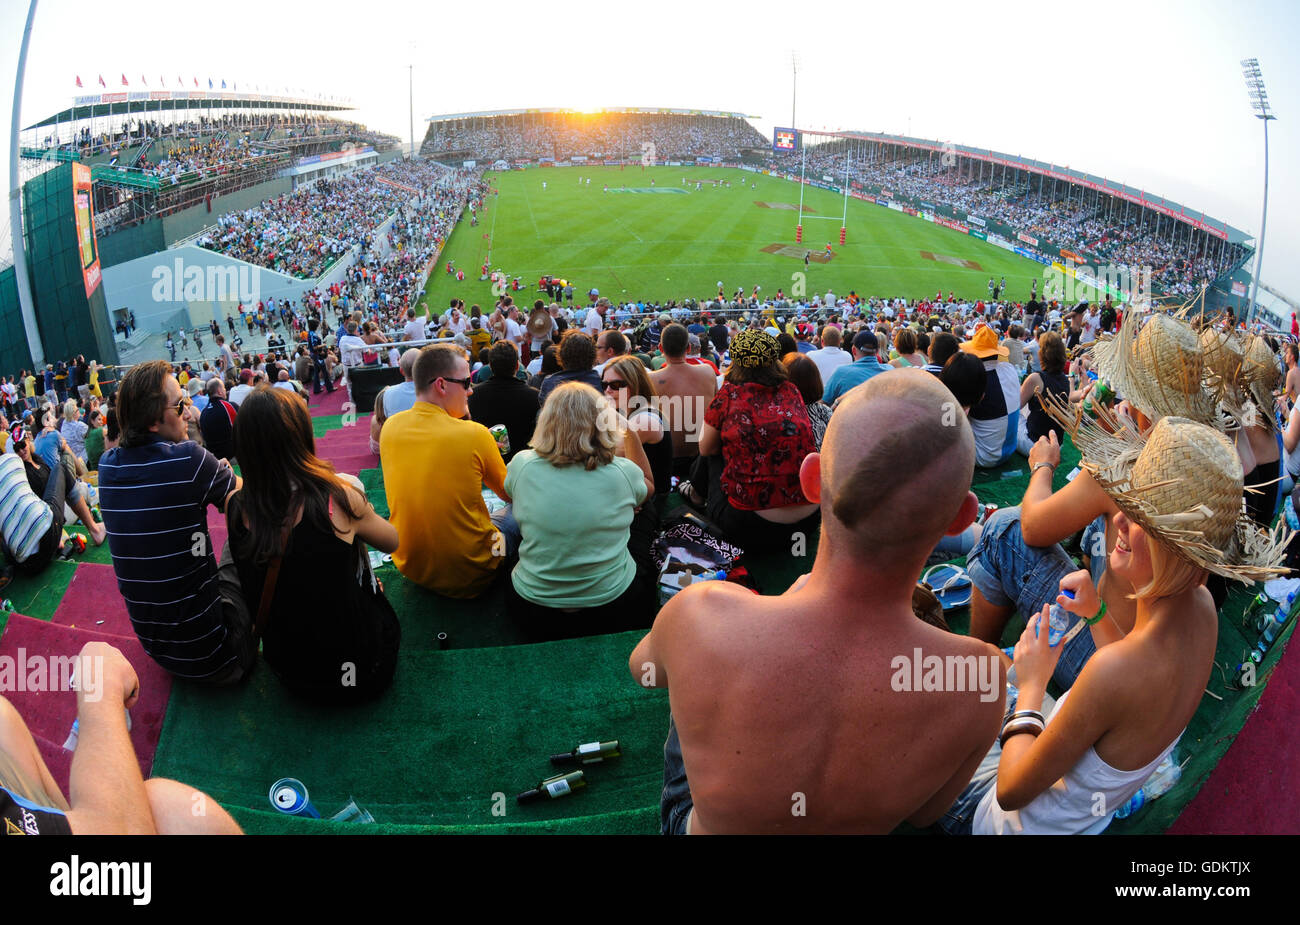 Spectators watch from the stands, Dubai Rugby 7s, Dubai, UAE Stock Photo